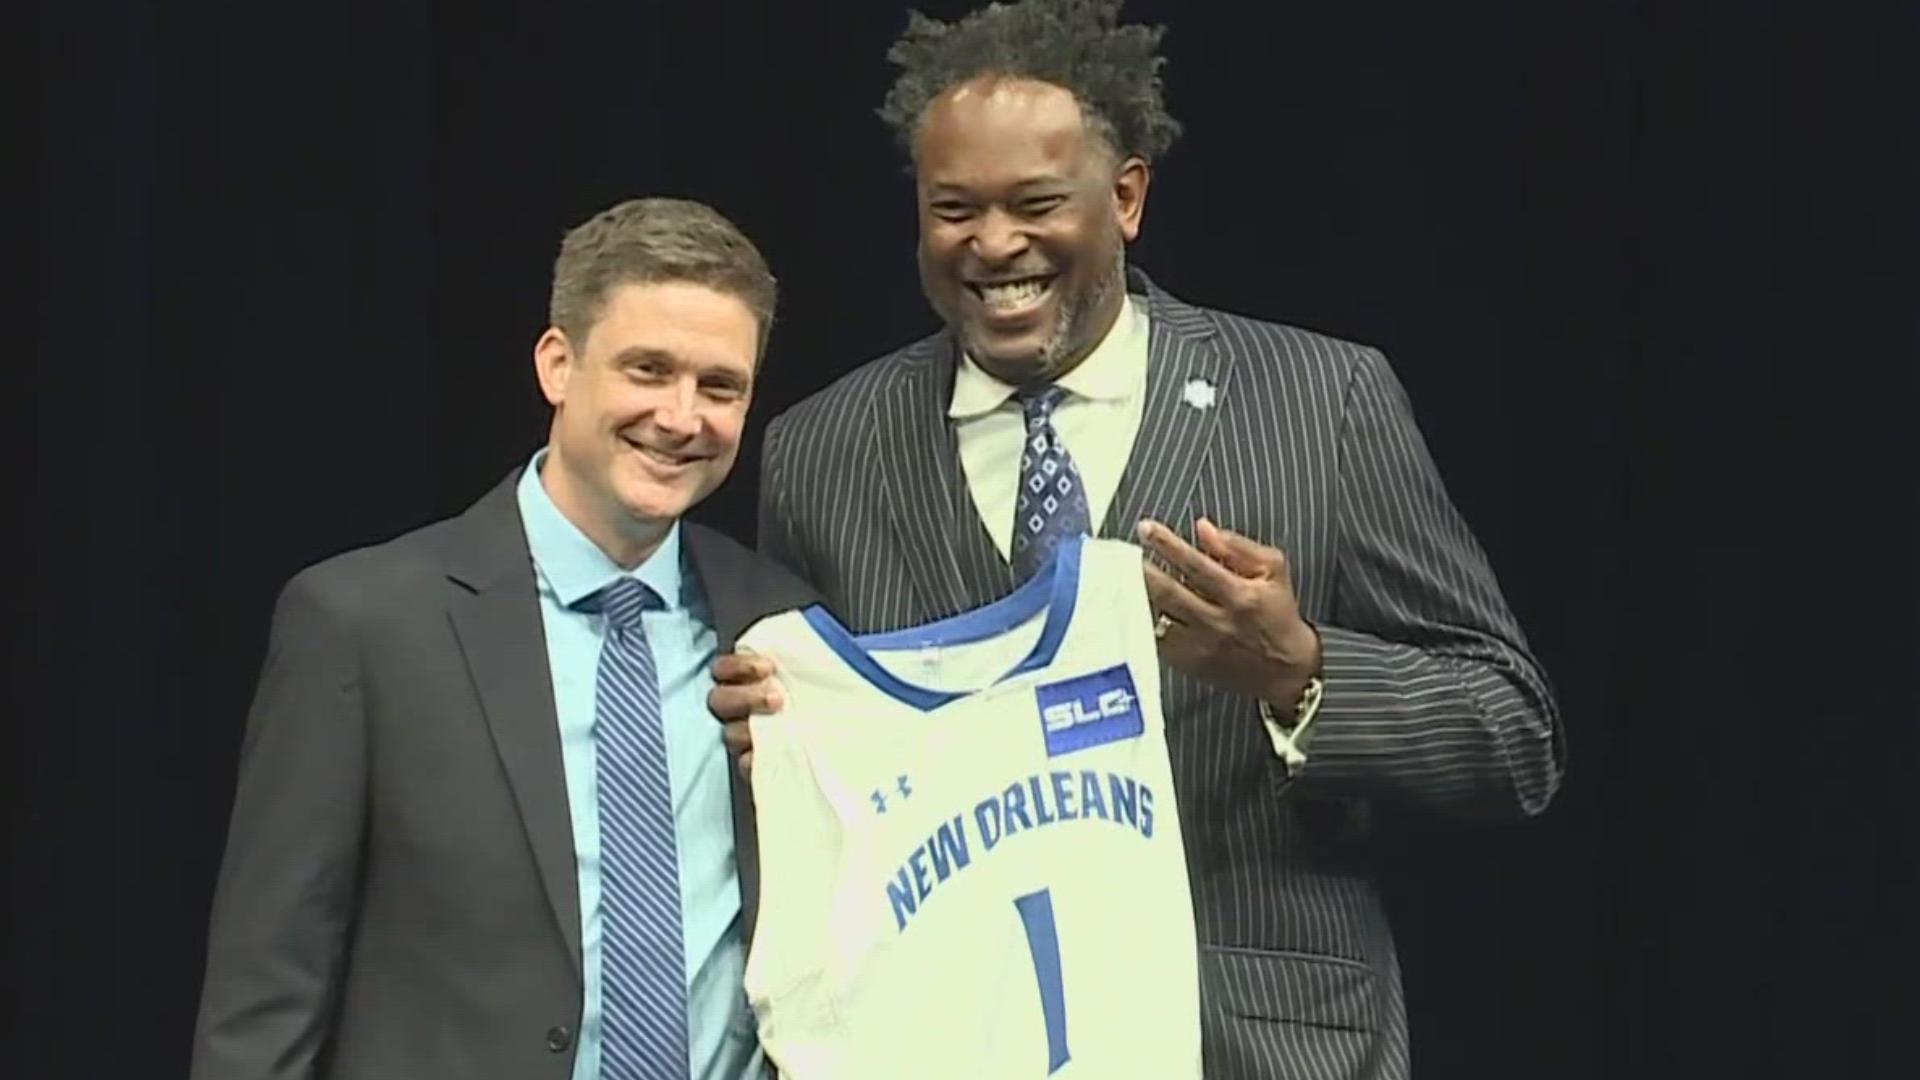 UNO introduced it's new men's basketball coach on April 25. Stacy Hollowell won a national championship at Loyola in 2022.